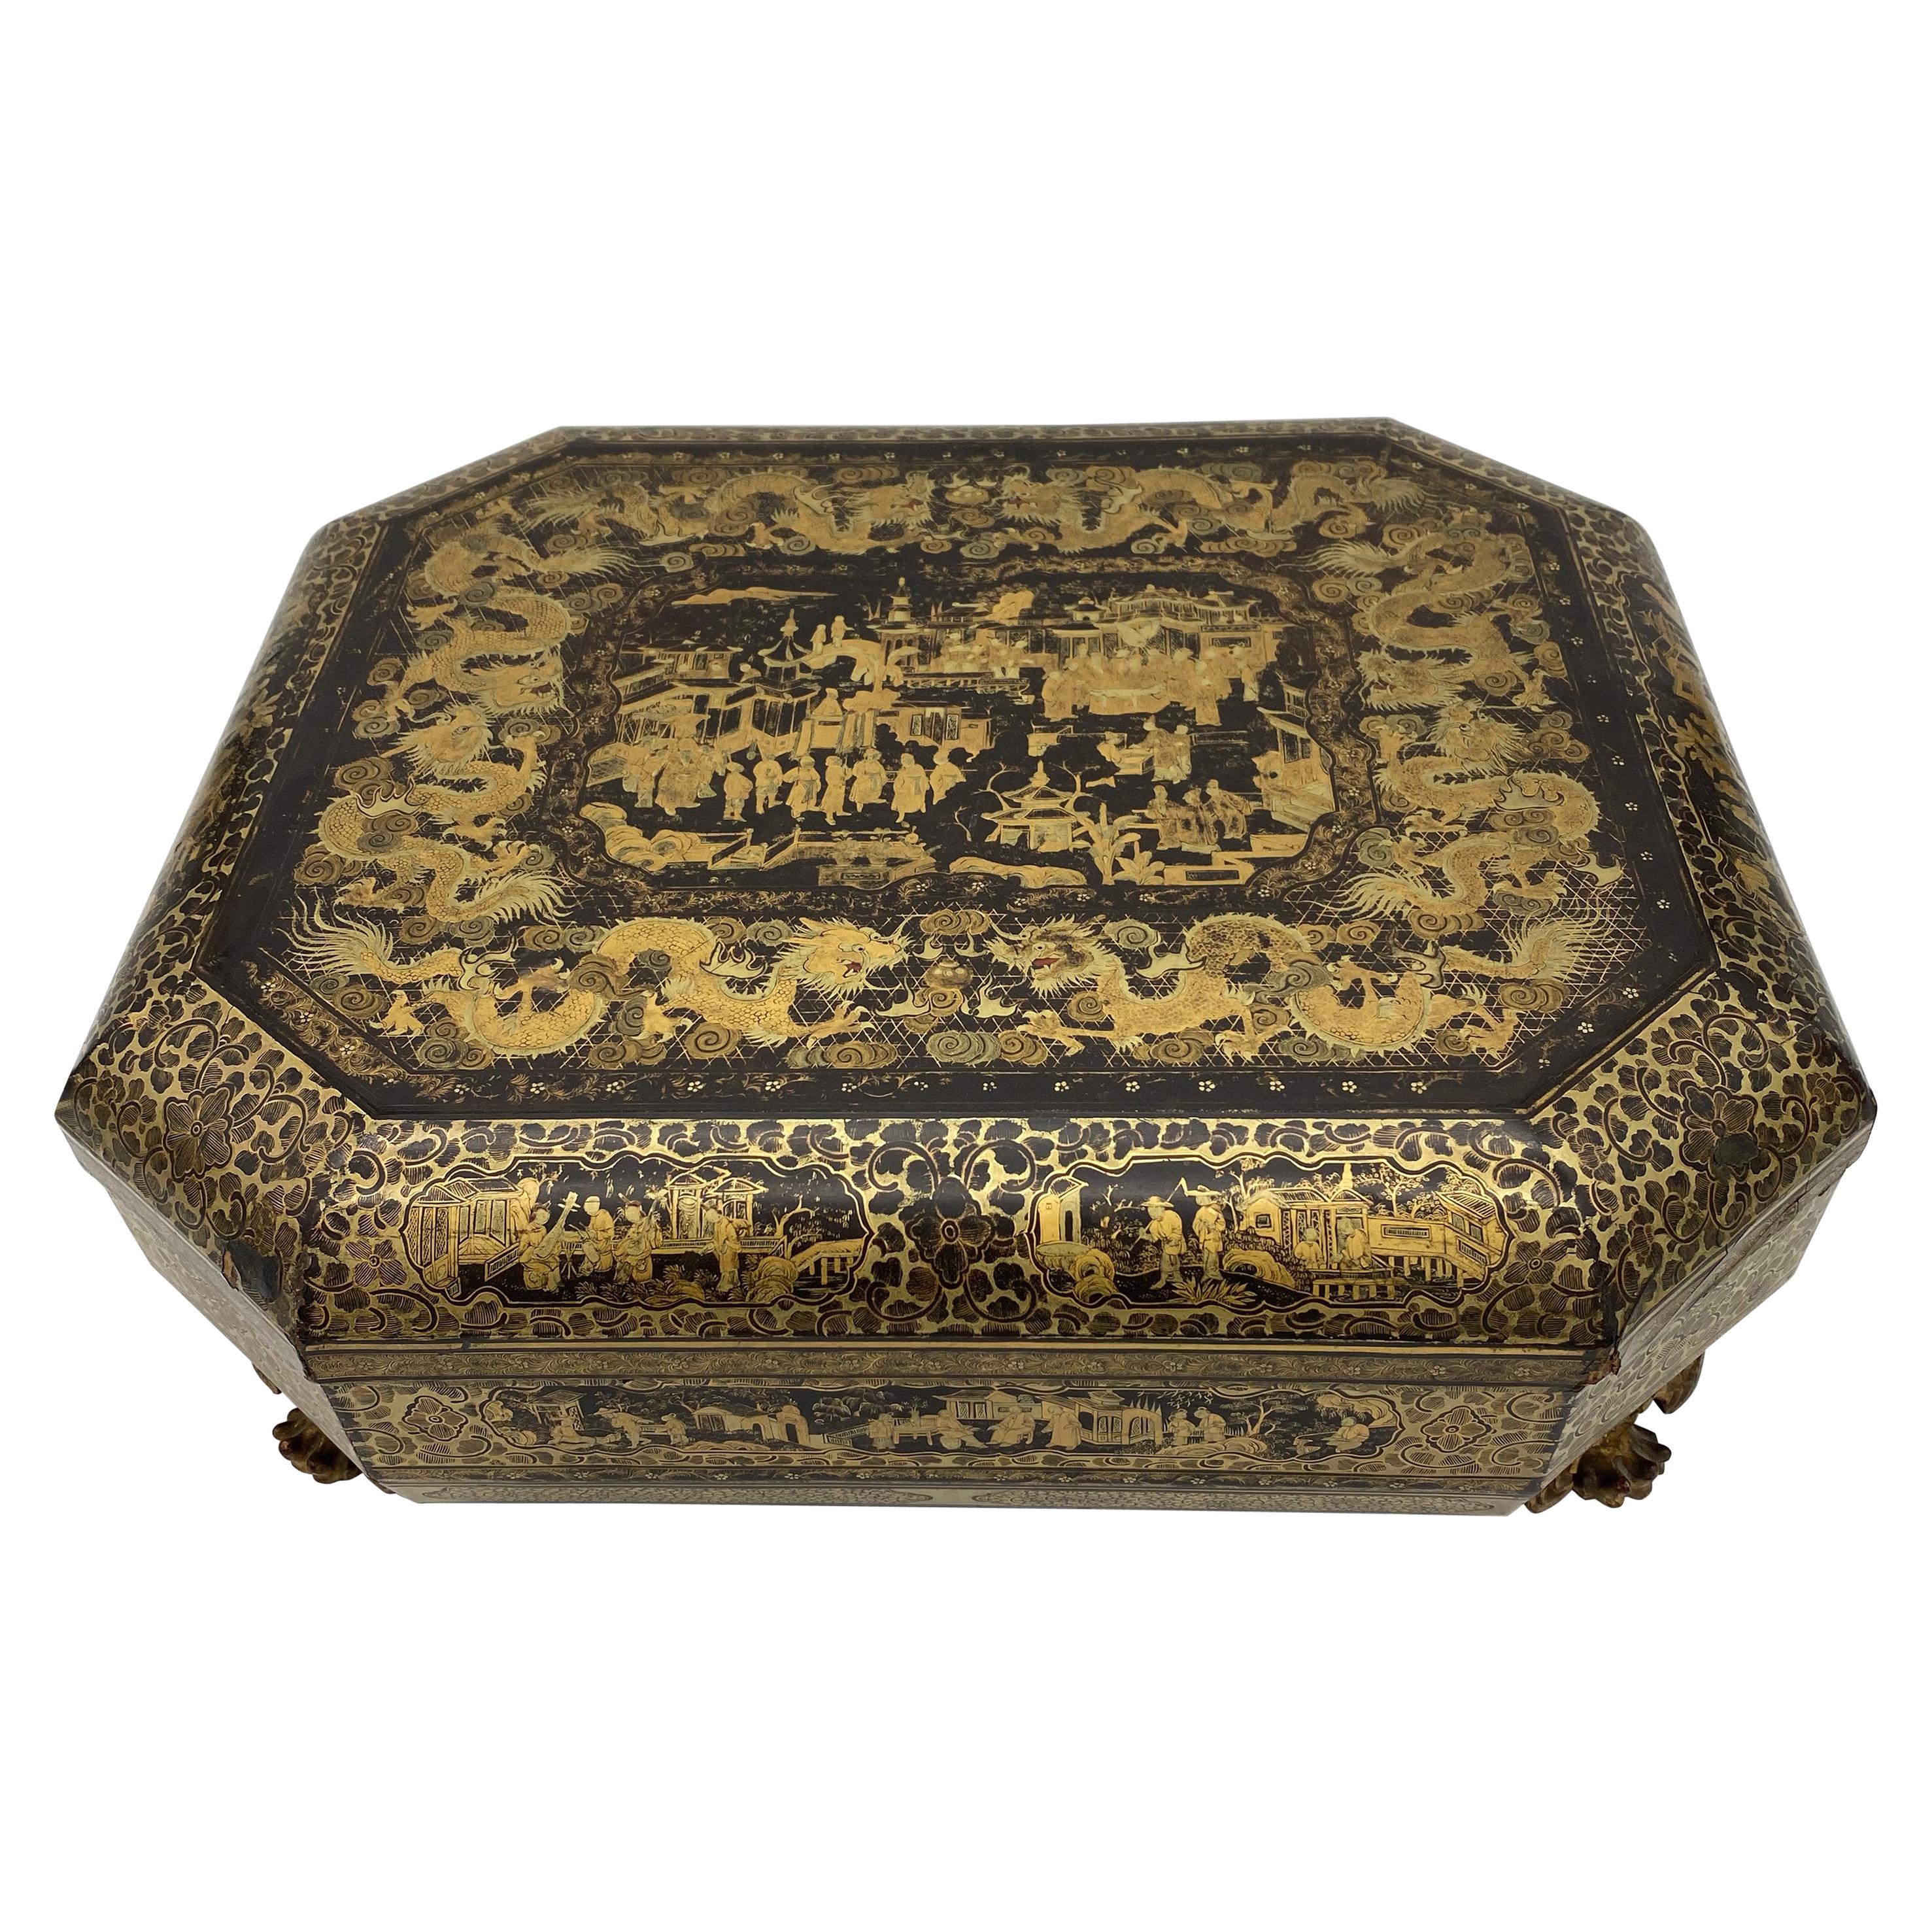 Antique 19th Century Export Chinese Lacquer Gaming Box For Sale